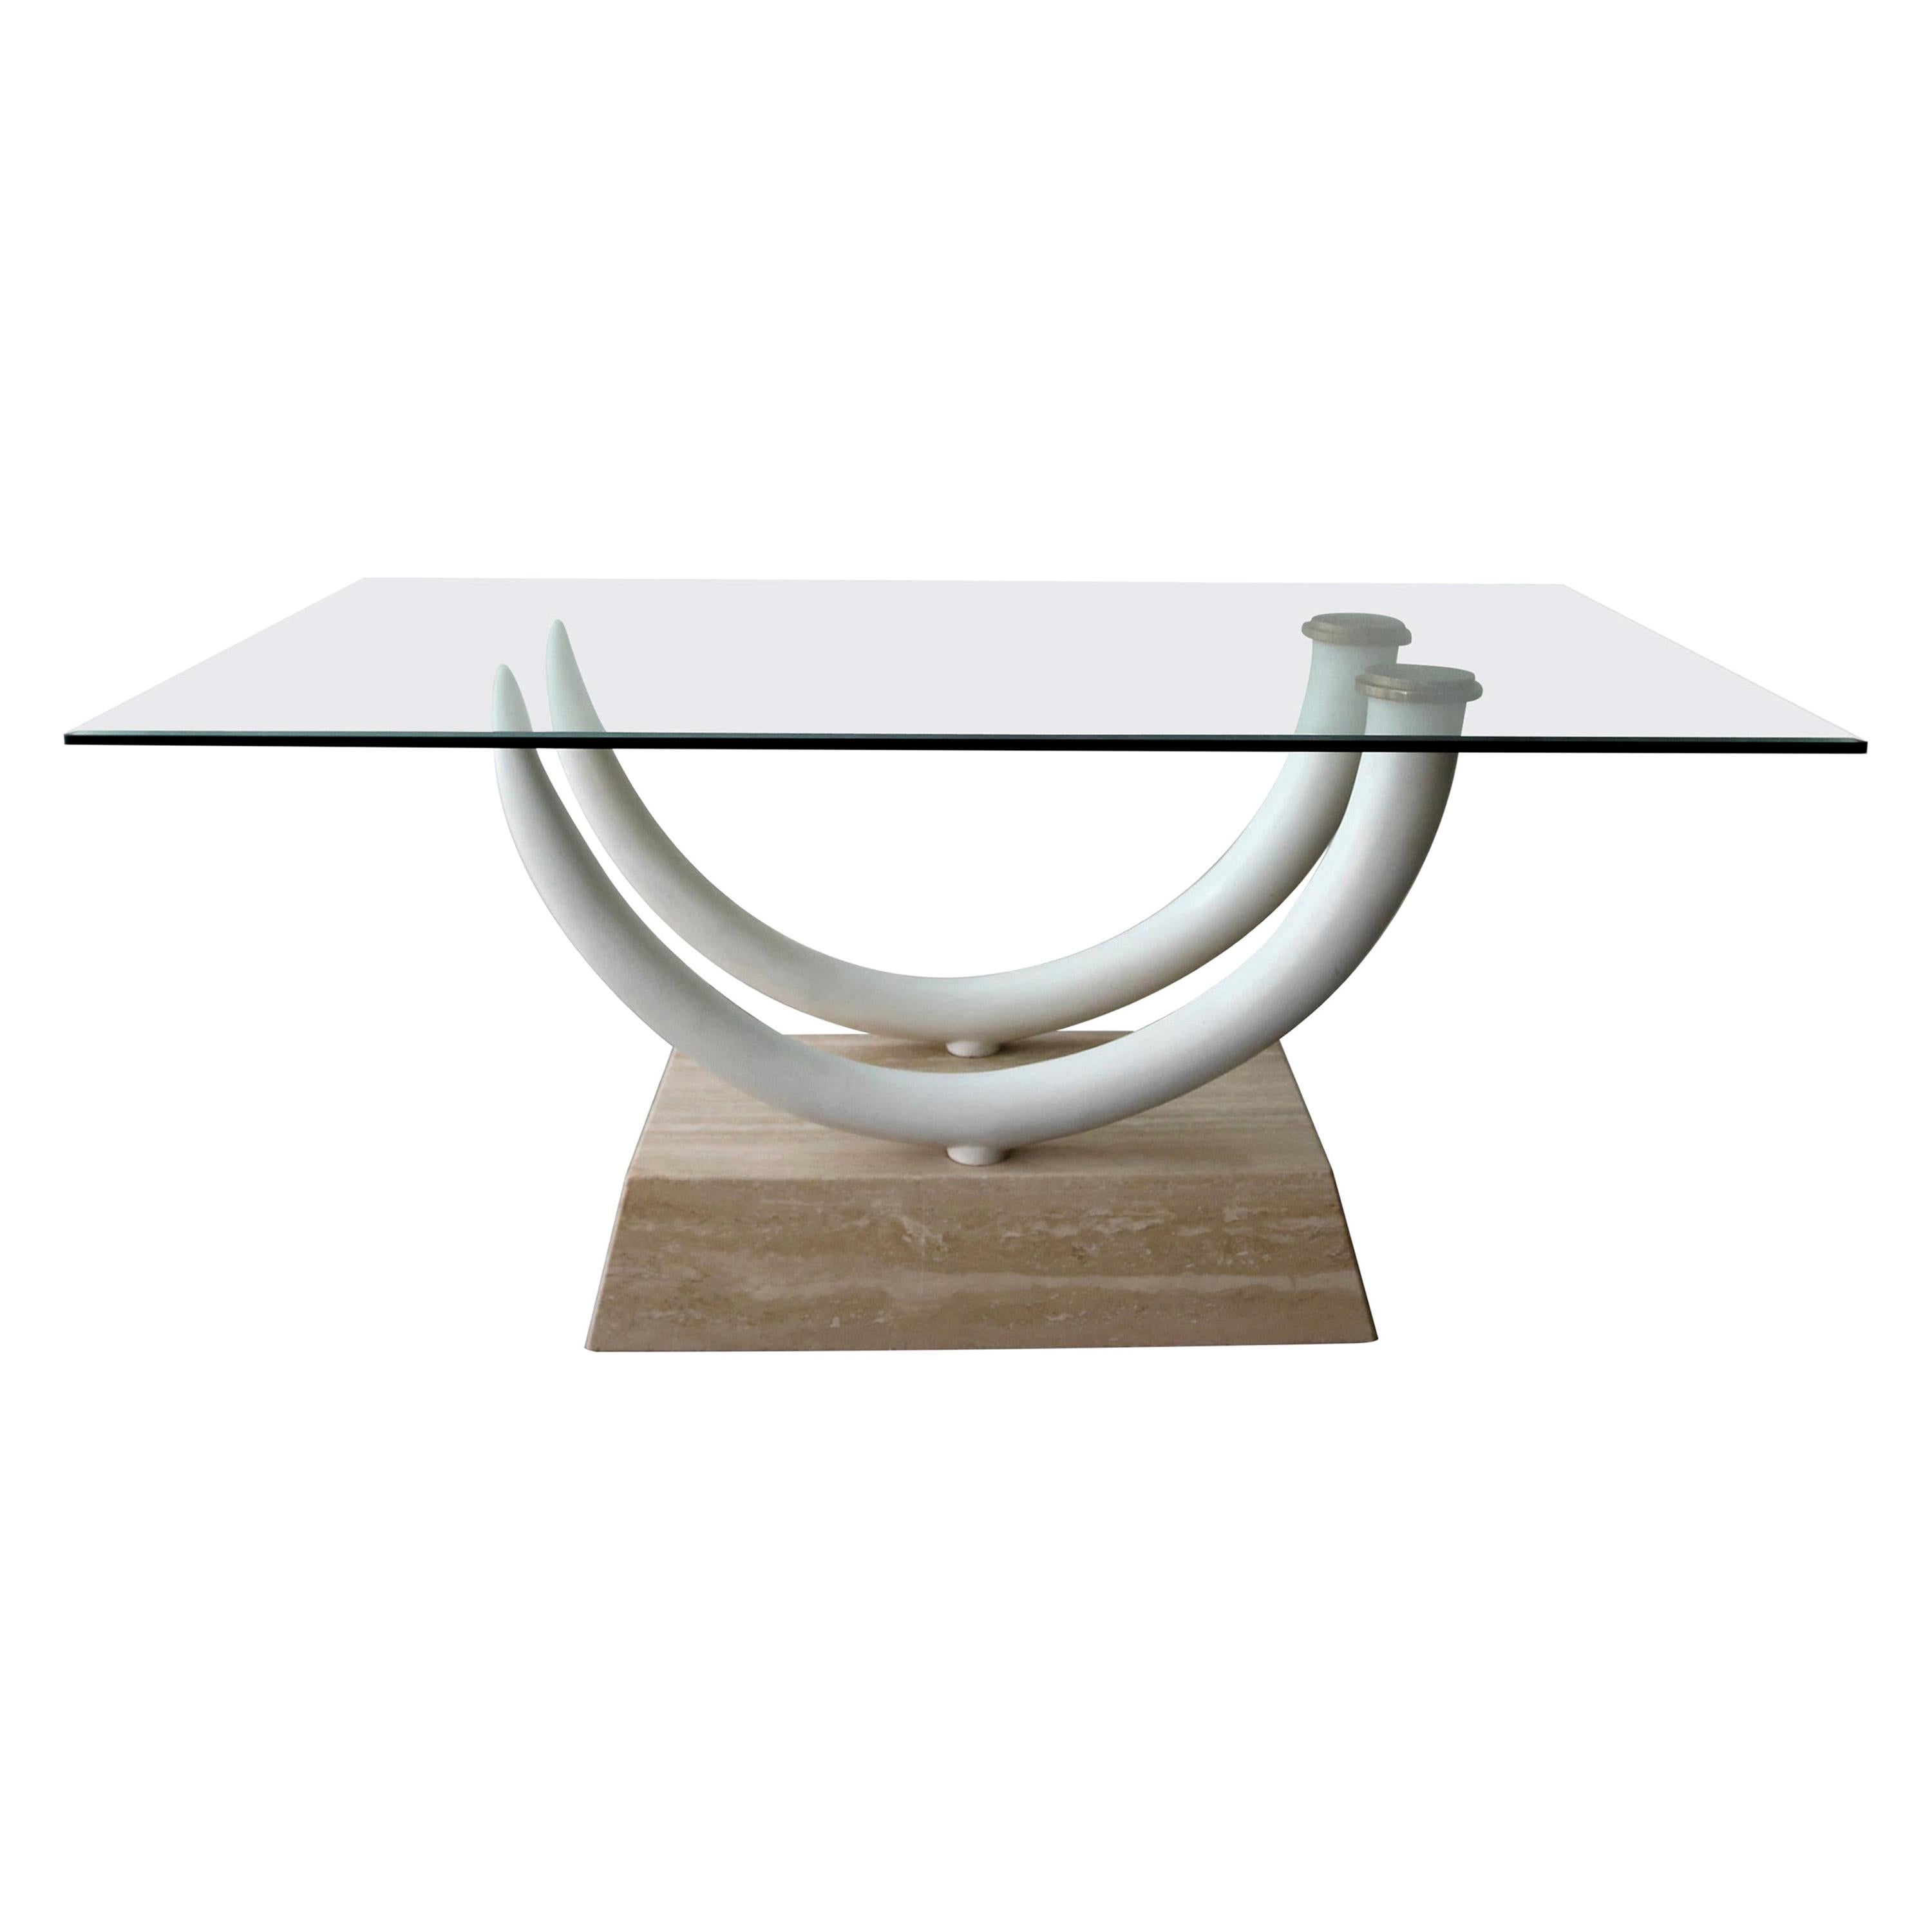 Tusk and Travertine Table